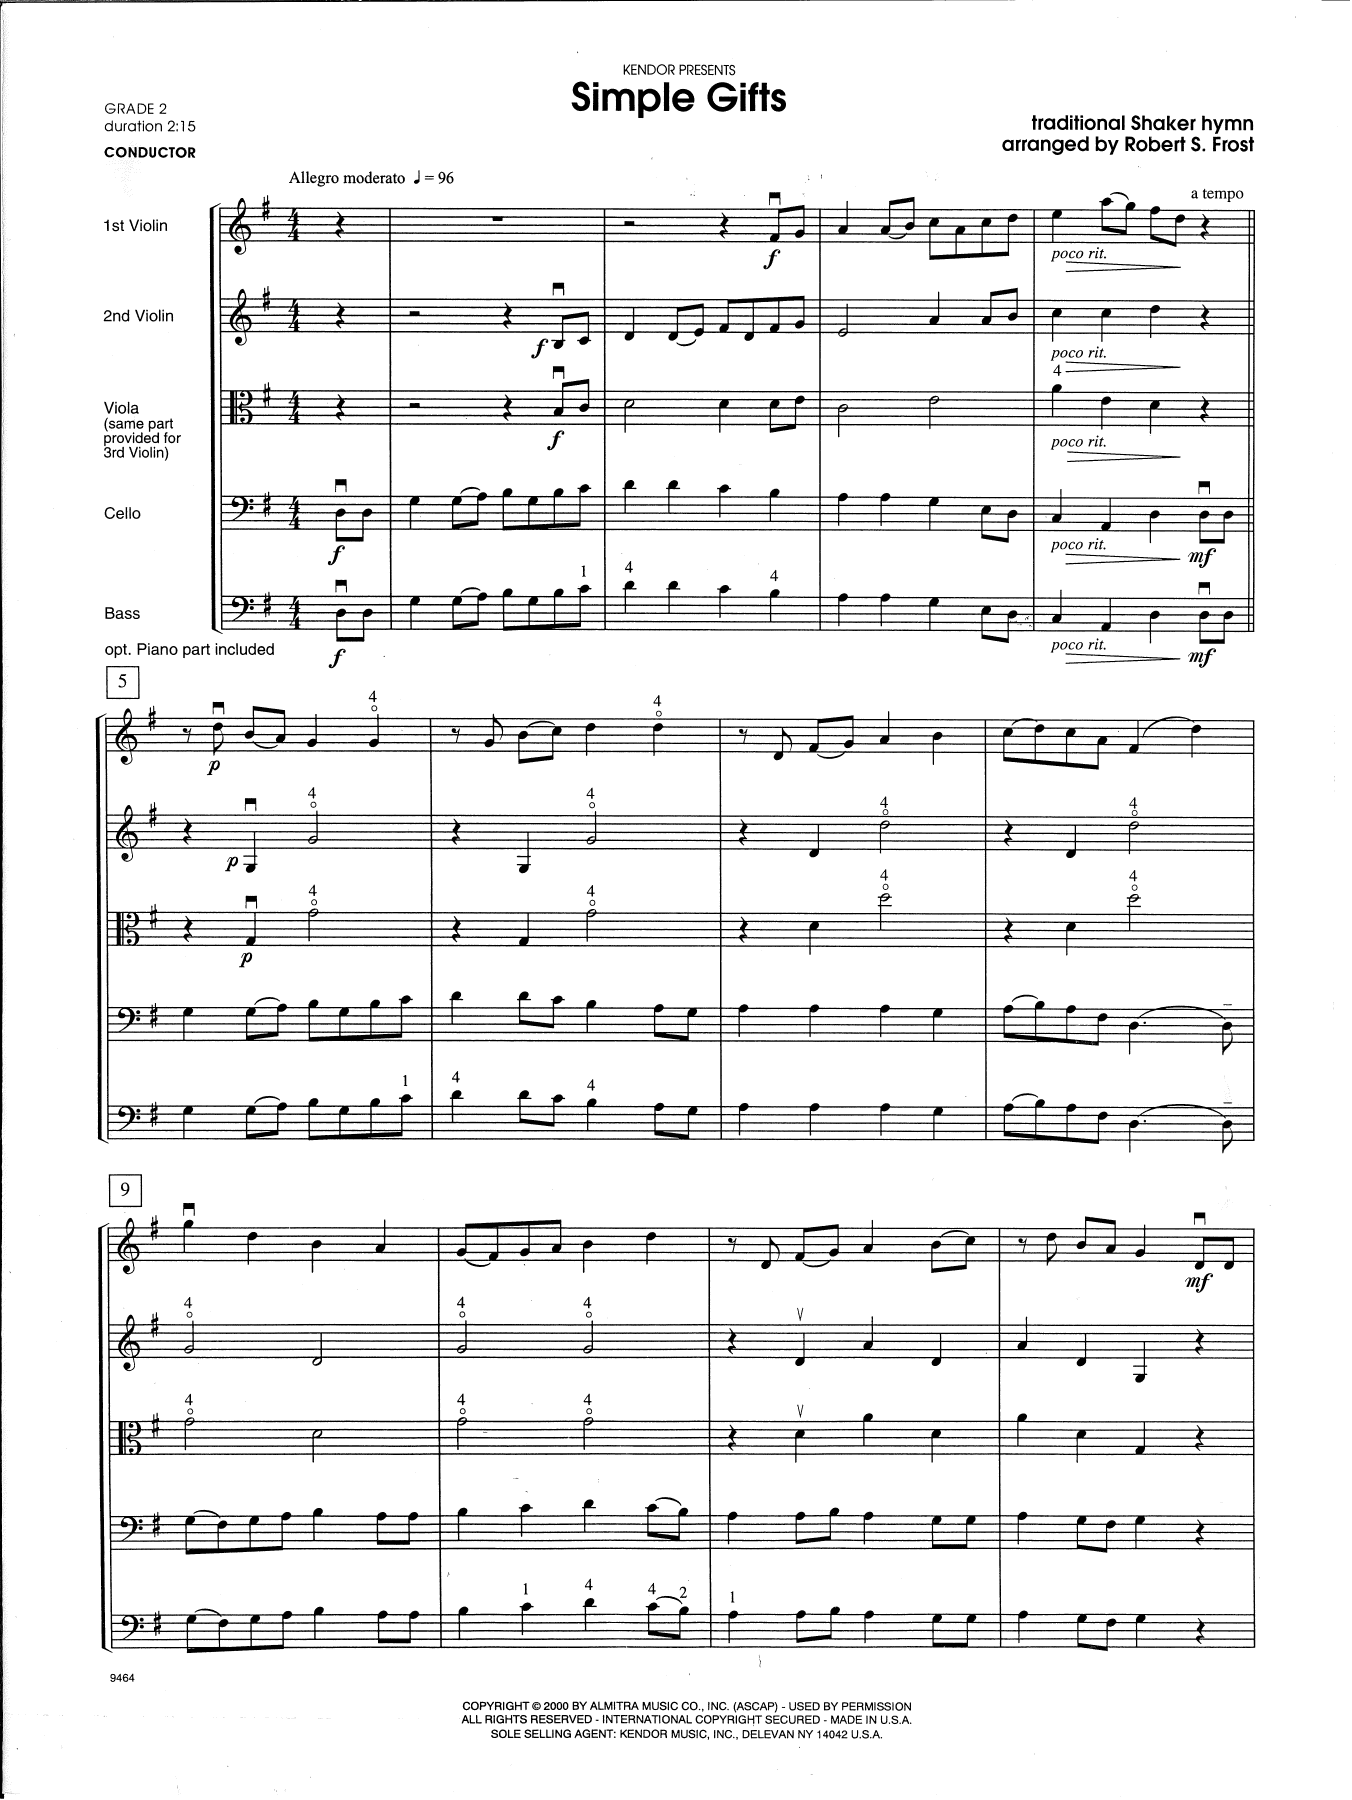 Download Robert S. Frost Simple Gifts - Full Score Sheet Music